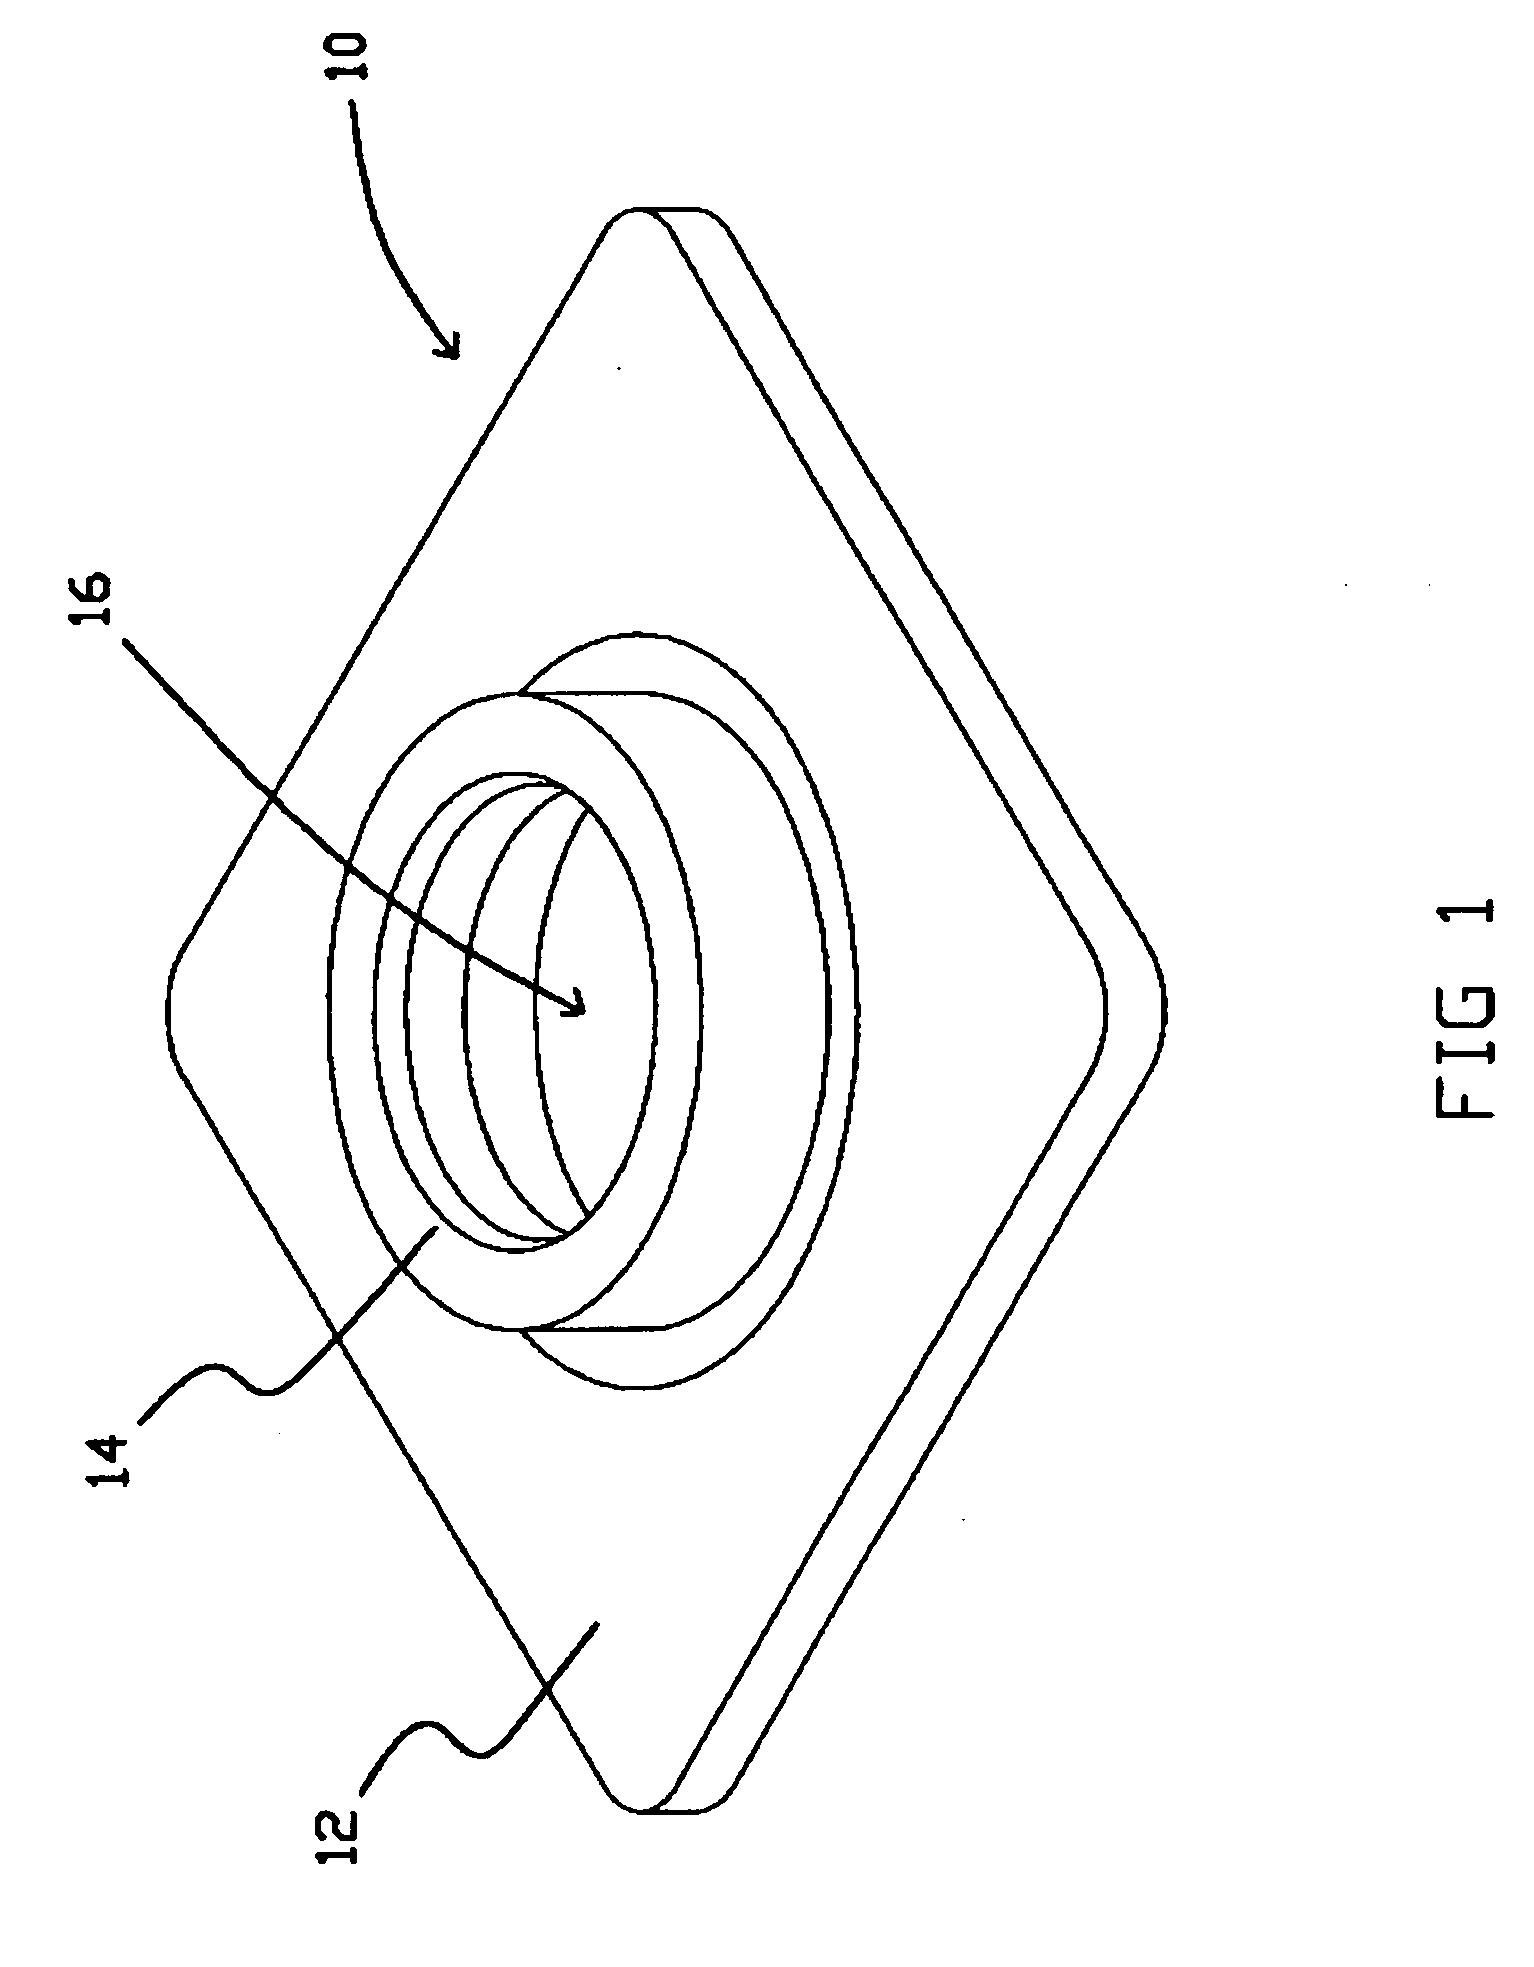 Swaging-optimized baseplate for disk drive head suspension